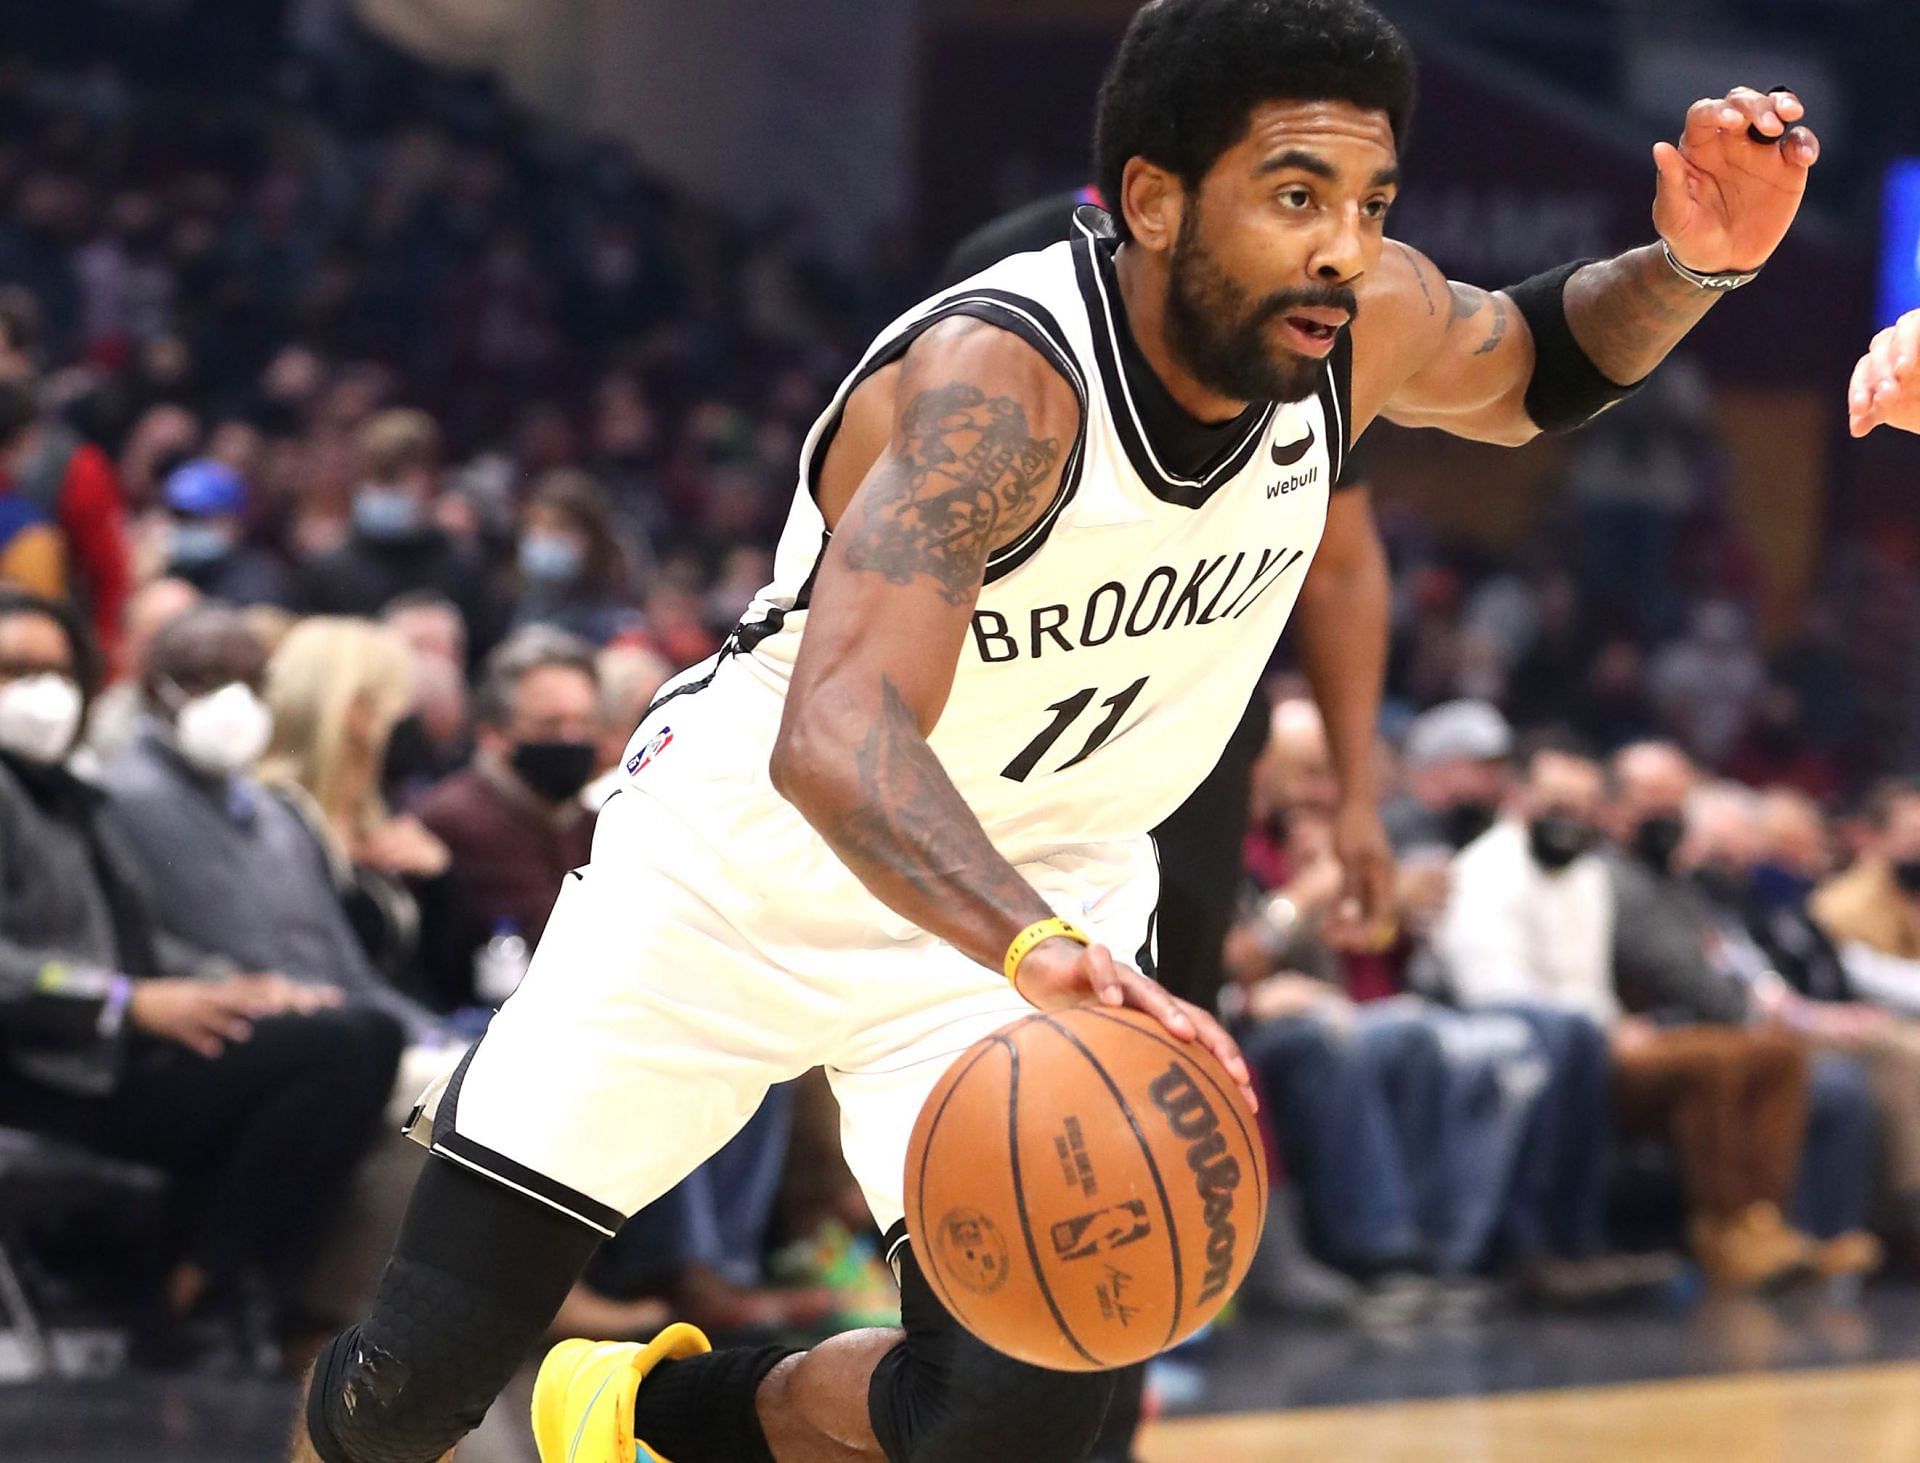 Kyrie Irving has badly struggled in the last two games for the Brooklyn Nets. [Photo: New York Post]